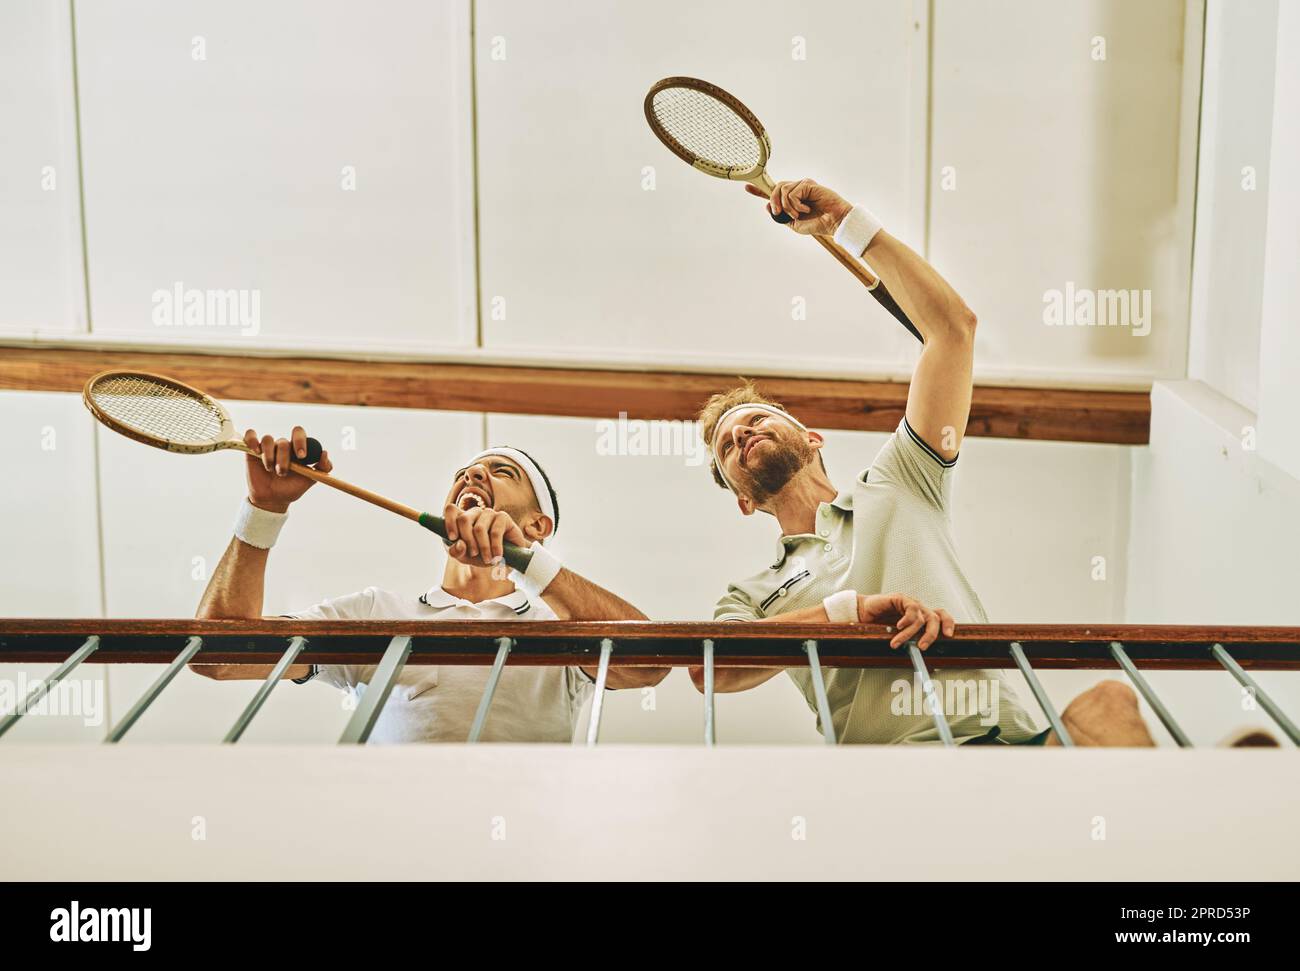 Youll find the winners at the top. two young men watching a game of squash from the viewing gallery. Stock Photo